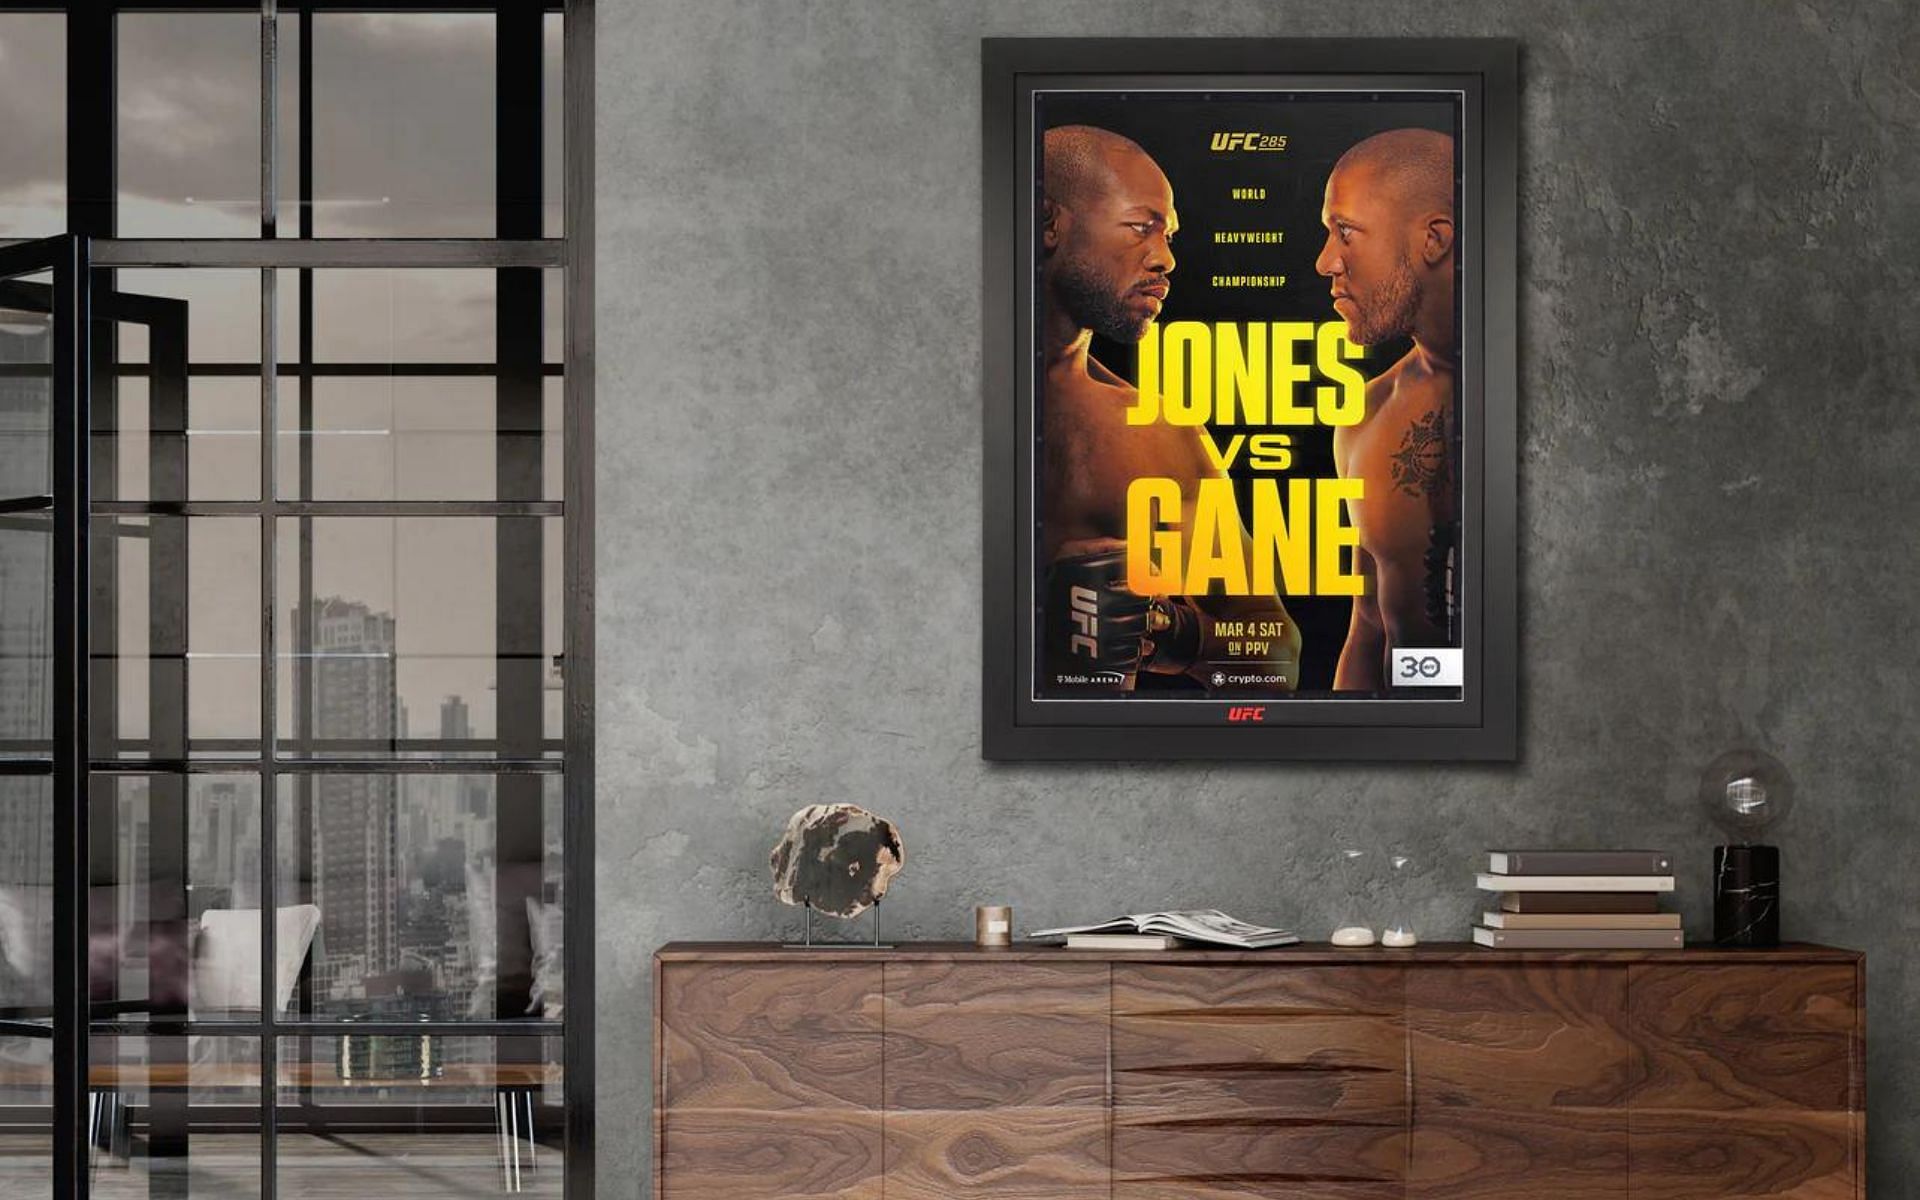 Limited edition UFC 285: Jones vs. Gane poster scale [Image courtesy: www.ufccollectibles.com]